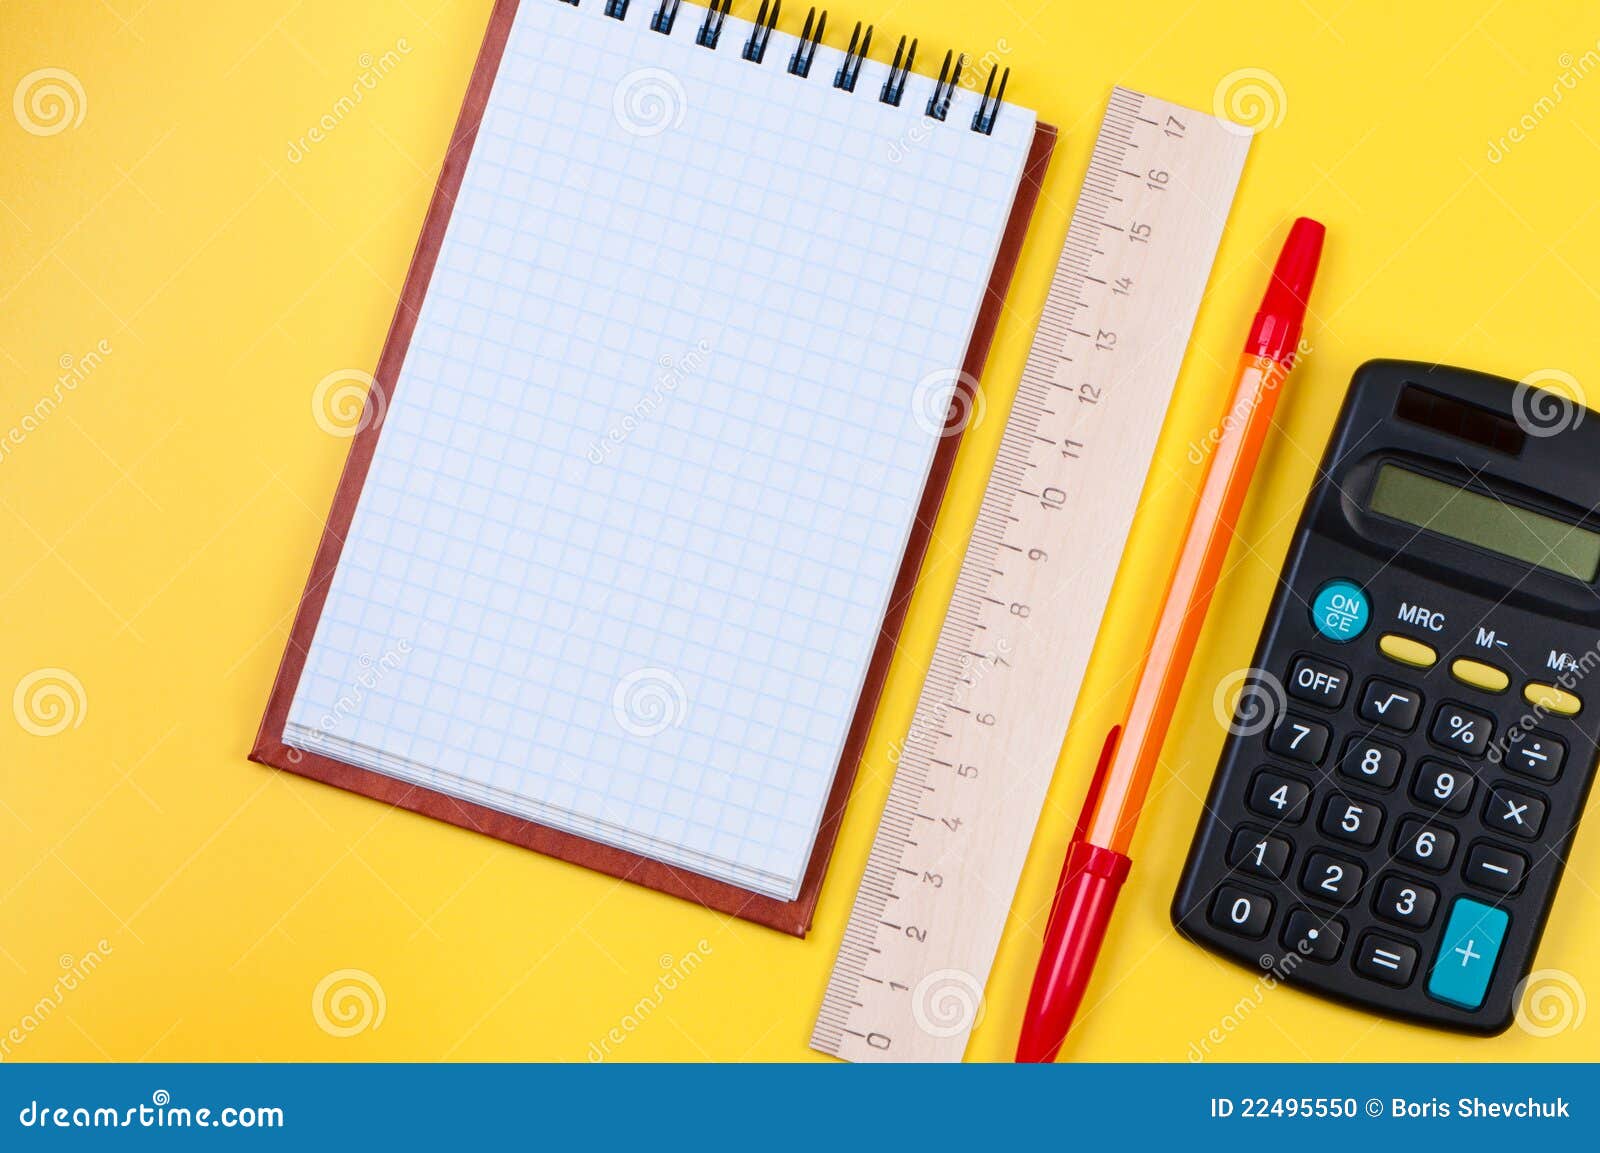 pocketbook and calculator on yellow background.